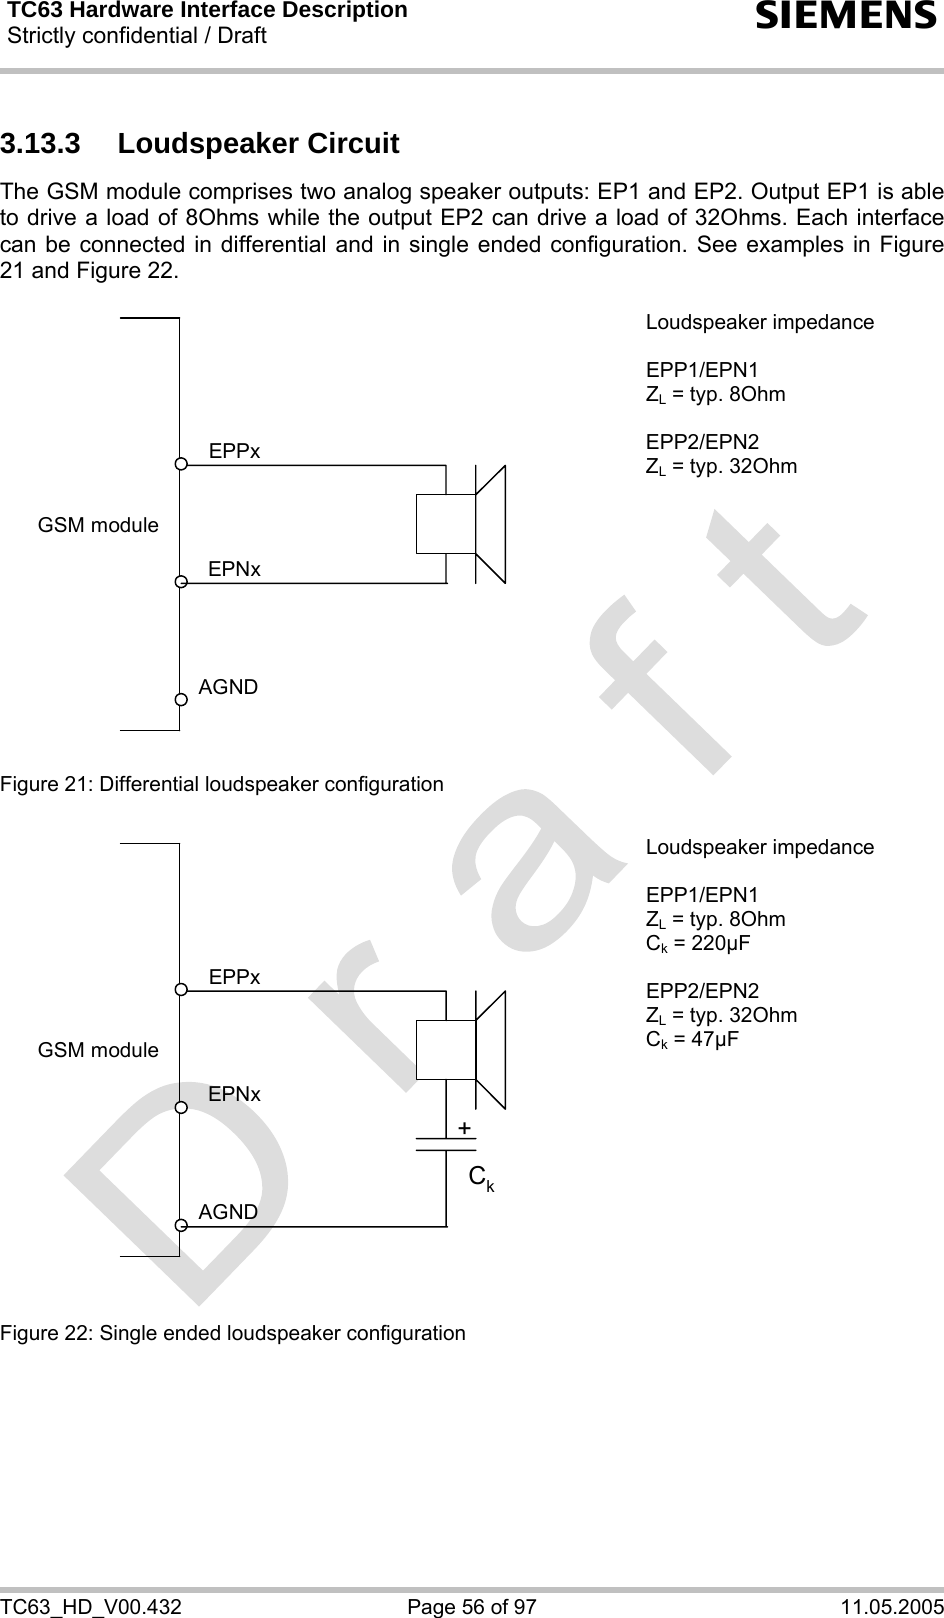 TC63 Hardware Interface Description Strictly confidential / Draft  s TC63_HD_V00.432  Page 56 of 97  11.05.2005 3.13.3 Loudspeaker Circuit The GSM module comprises two analog speaker outputs: EP1 and EP2. Output EP1 is able to drive a load of 8Ohms while the output EP2 can drive a load of 32Ohms. Each interface can be connected in differential and in single ended configuration. See examples in Figure 21 and Figure 22.  GSM moduleAGNDEPNxEPPx  Figure 21: Differential loudspeaker configuration Loudspeaker impedance  EPP1/EPN1 ZL = typ. 8Ohm  EPP2/EPN2 ZL = typ. 32Ohm  GSM moduleAGNDEPNxEPPx+Ck  Figure 22: Single ended loudspeaker configuration Loudspeaker impedance  EPP1/EPN1 ZL = typ. 8Ohm Ck = 220µF  EPP2/EPN2 ZL = typ. 32Ohm Ck = 47µF     